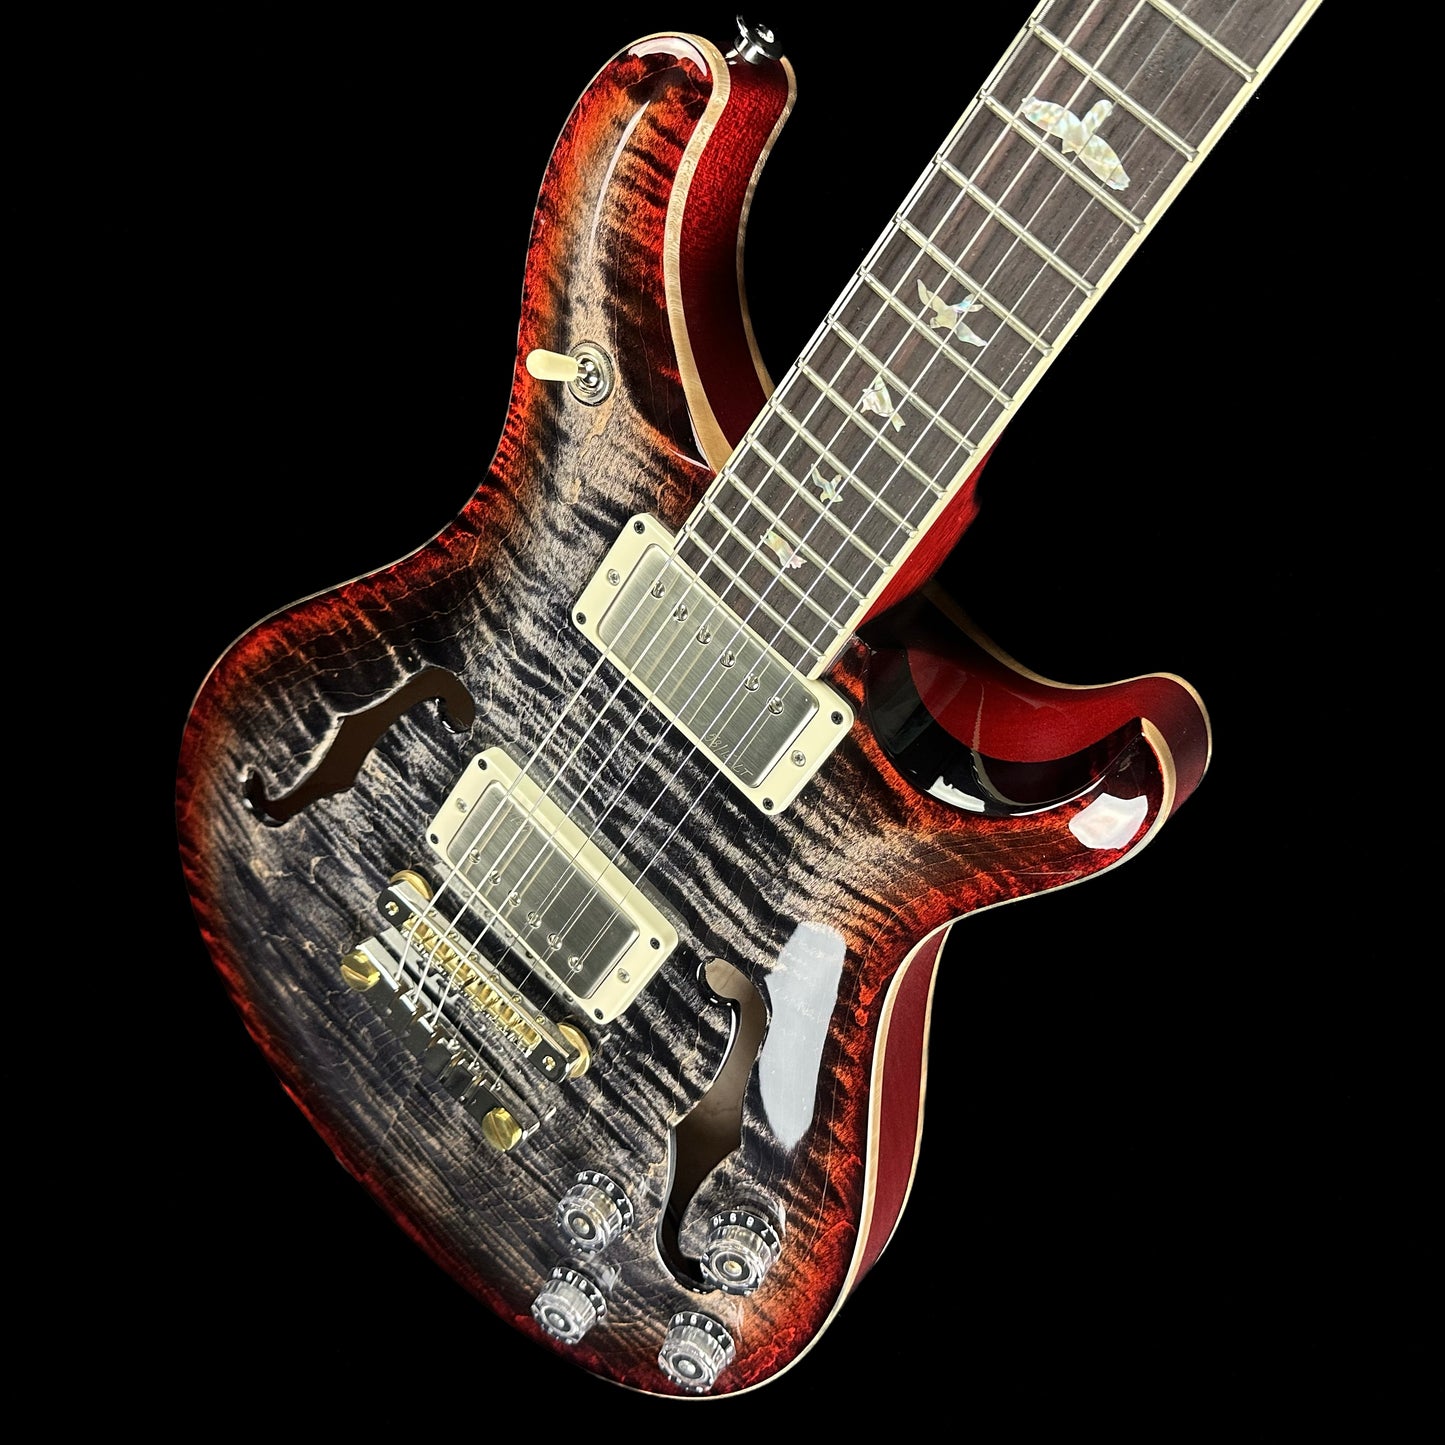 Top down angle of PRS McCarty 594 Hollowbody II Charcoal Cherry Burst Birds.